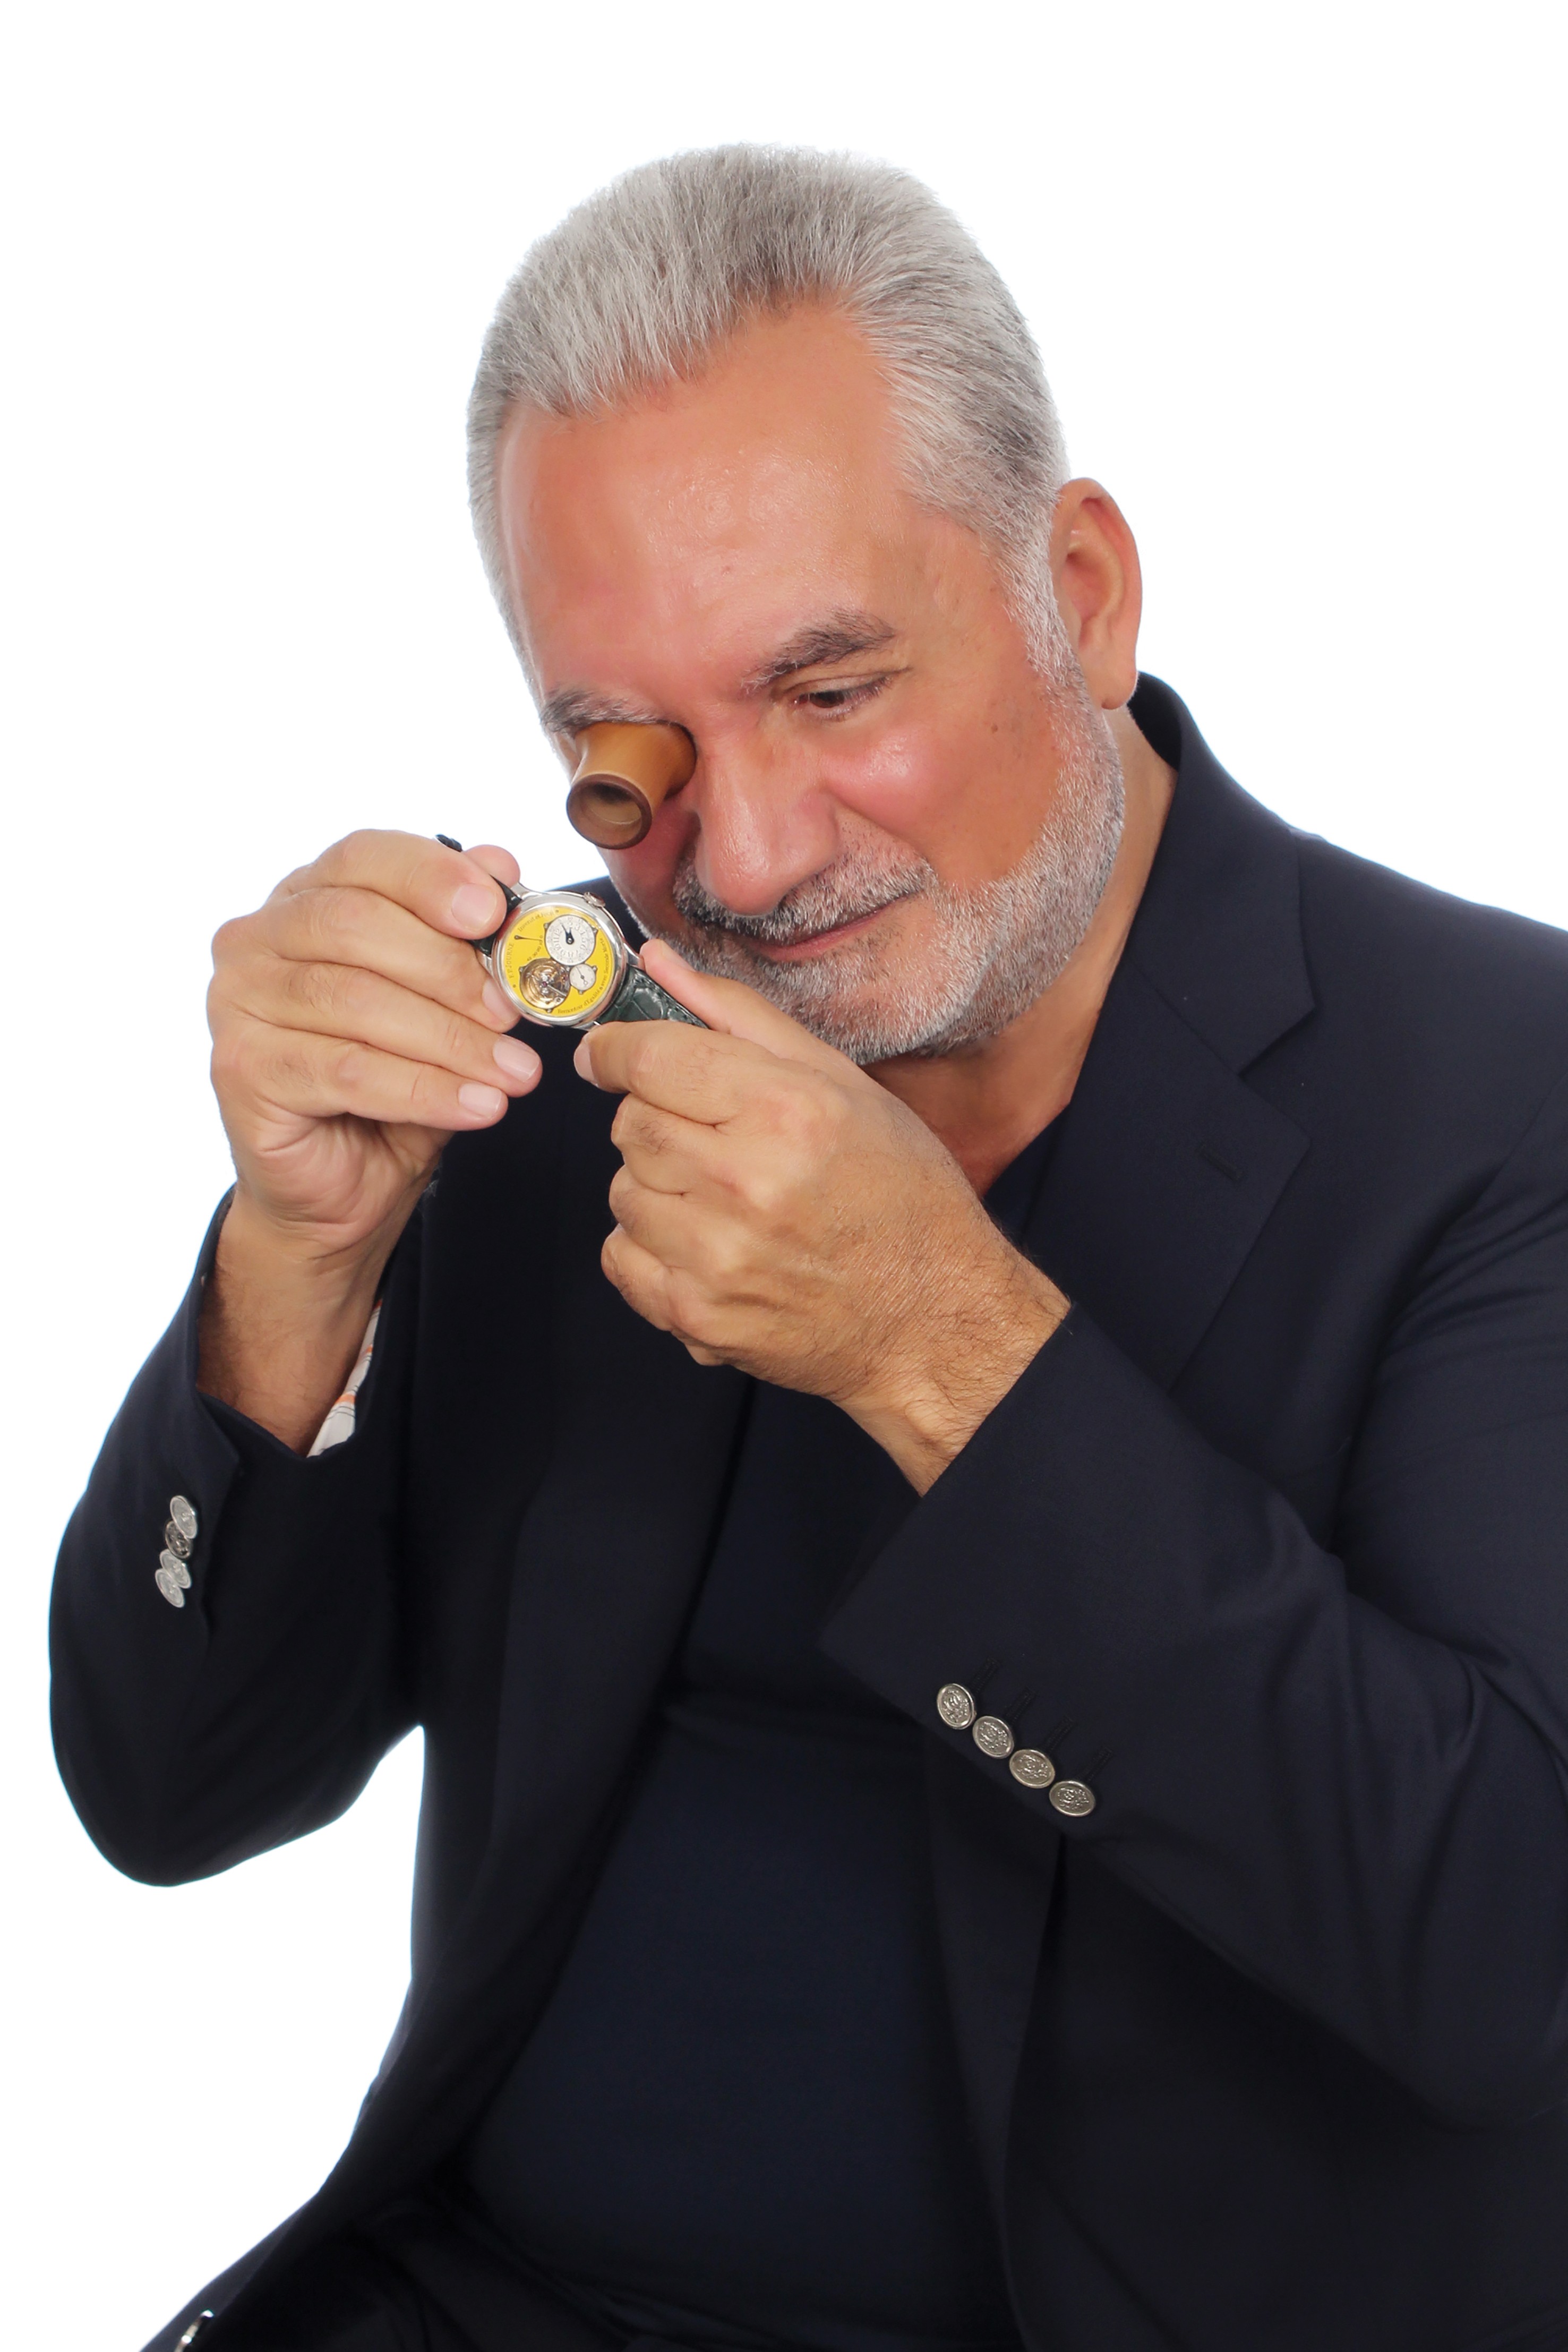 Claude Sfeir is a top collector of vintage watches among other precious investment items. Photo: Handout